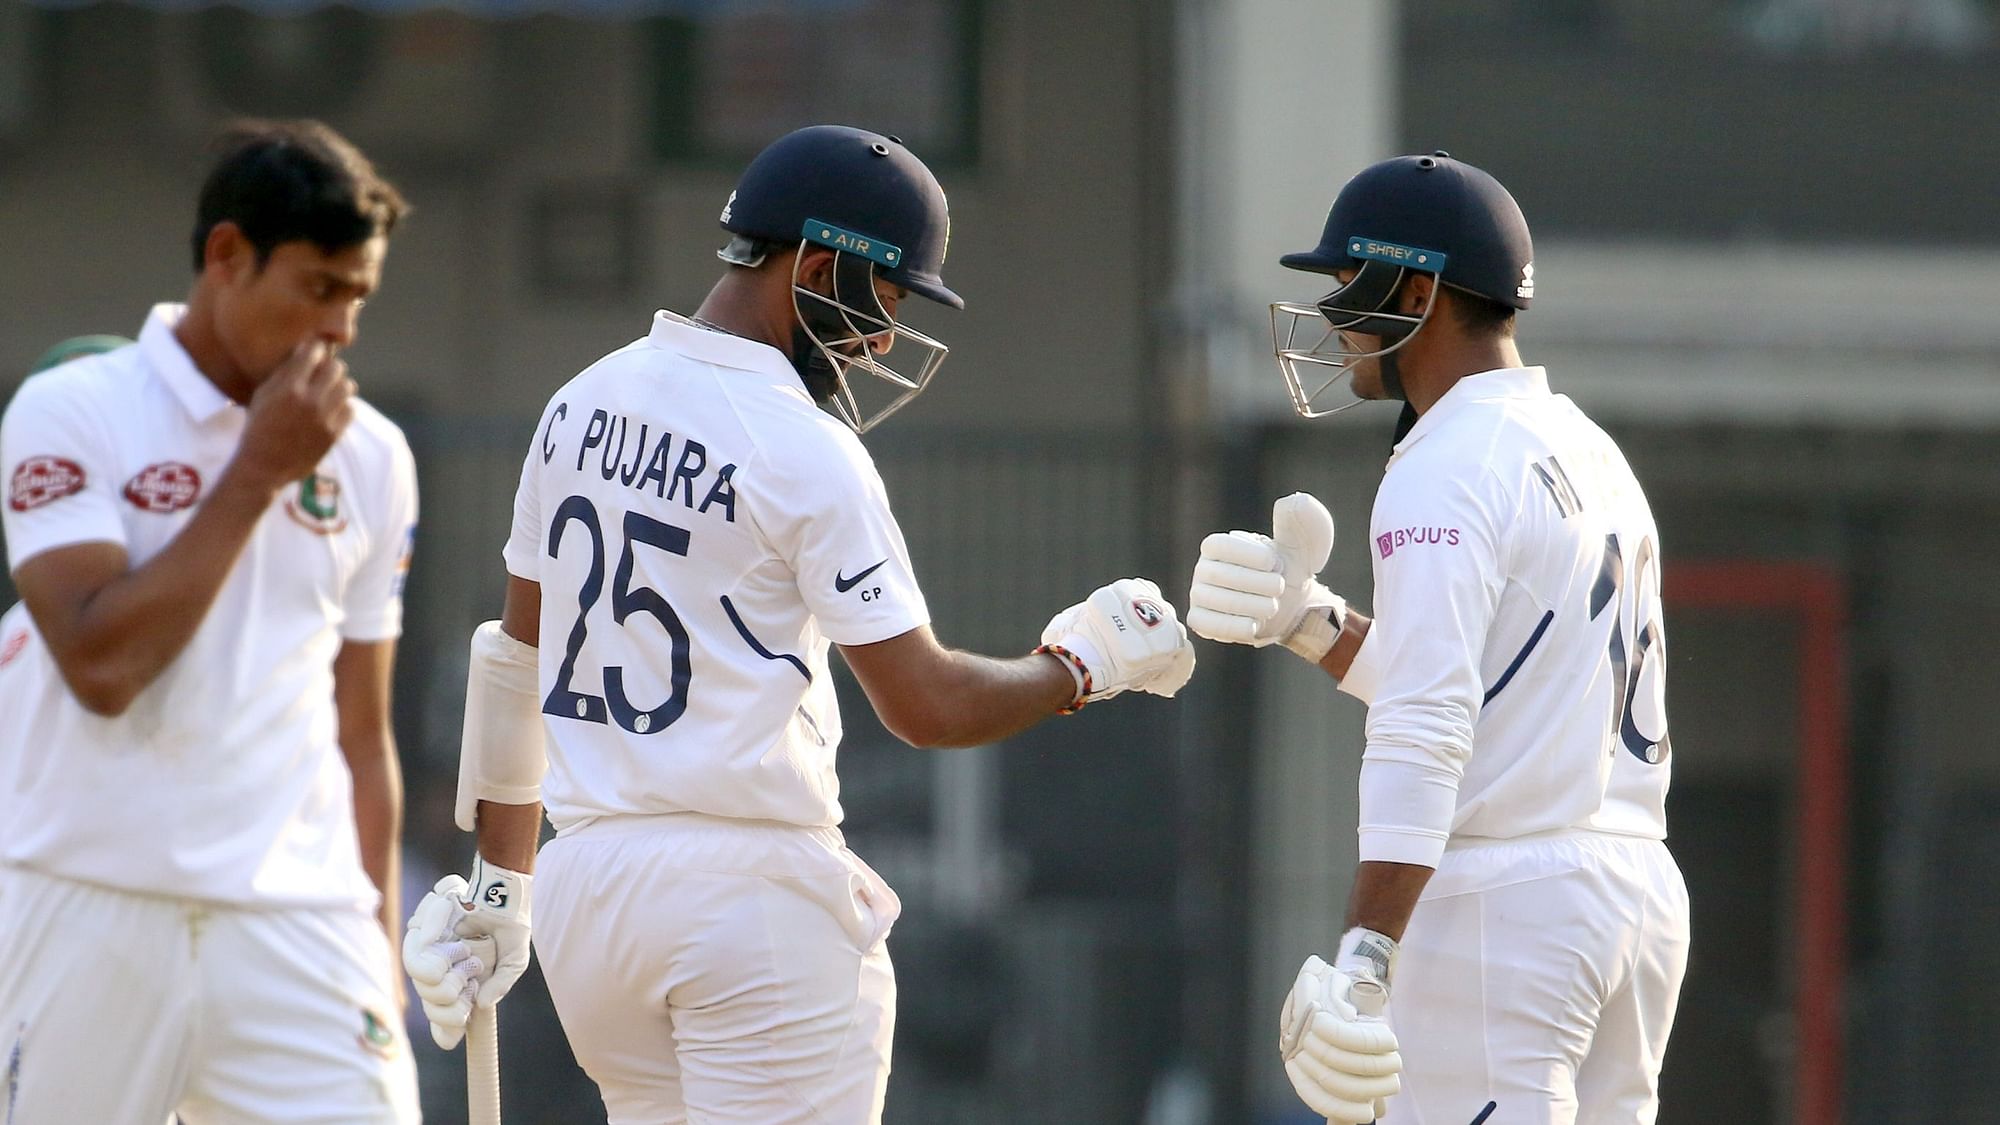 India were batting at 86/1 at Stumps on Day 1 of the Indore Test against Bangladesh.